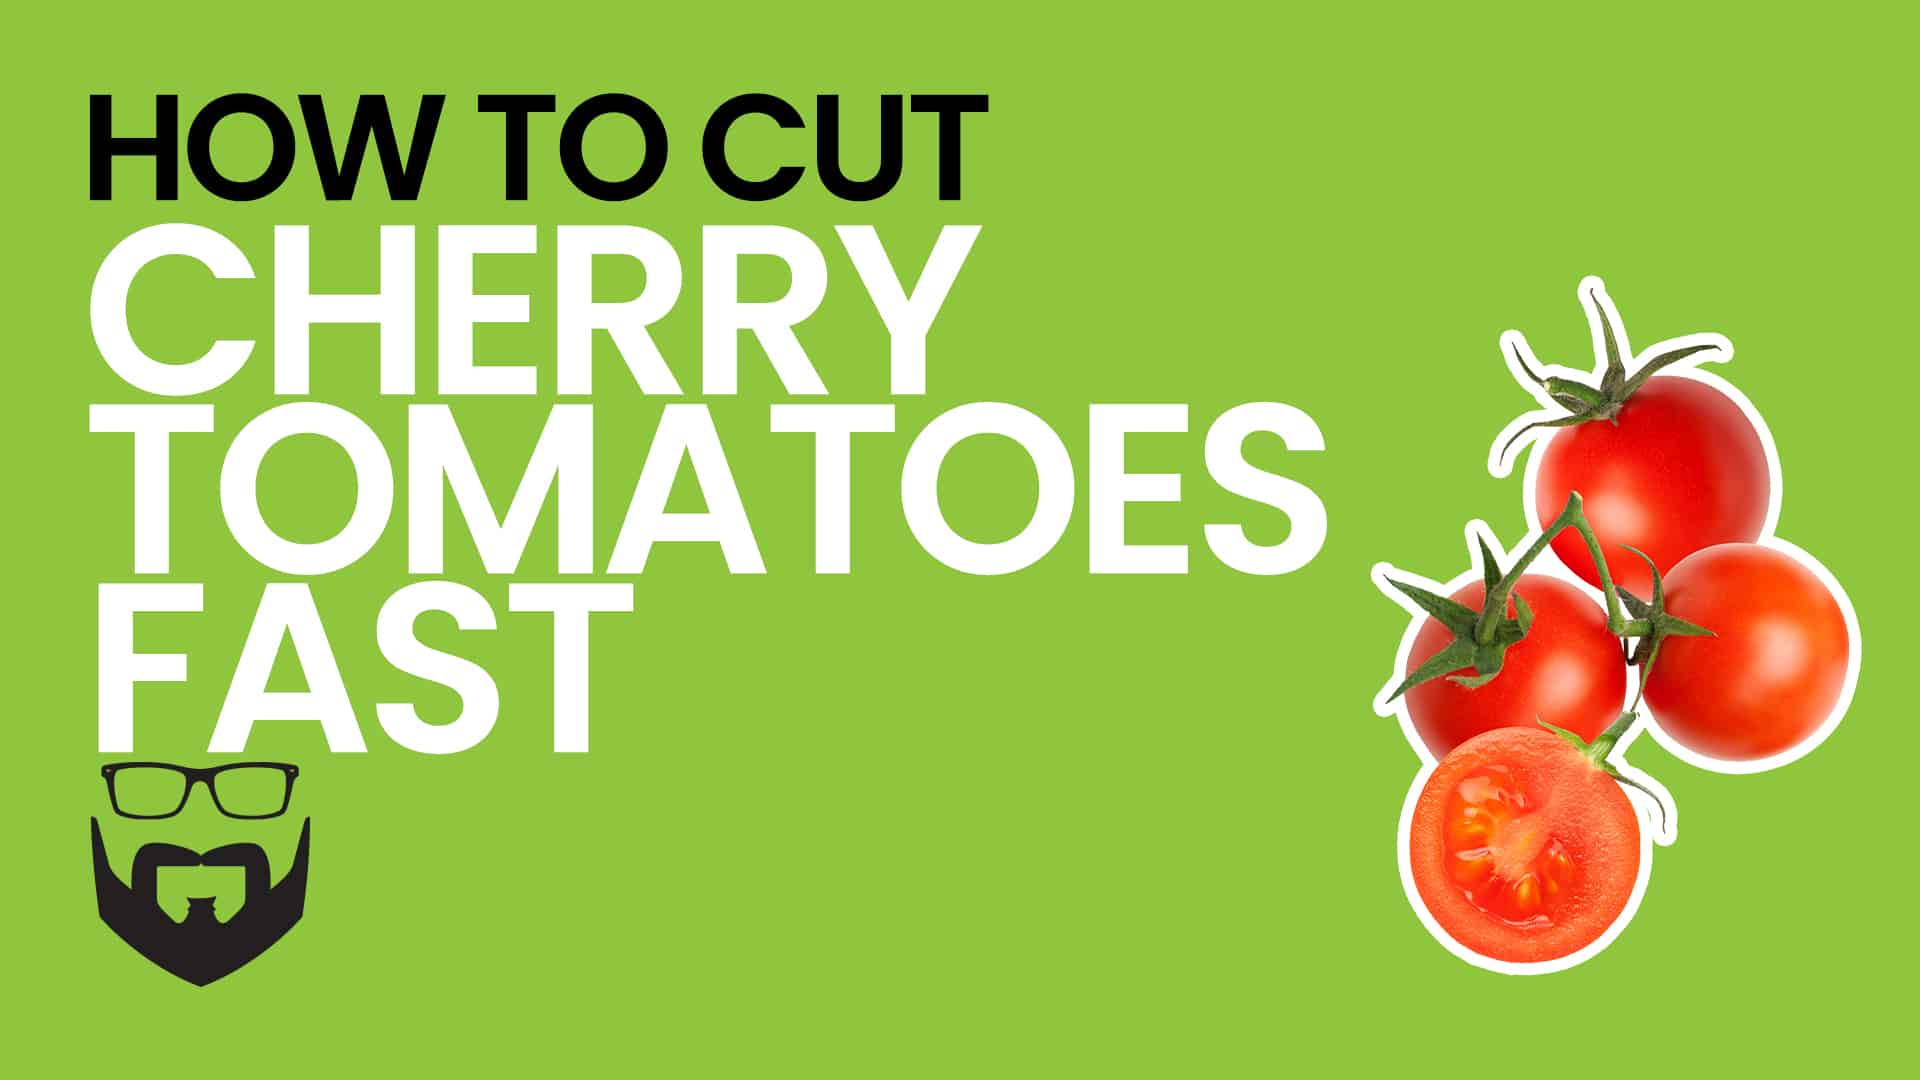 How to Cut Cherry Tomatoes Fast Video - Green